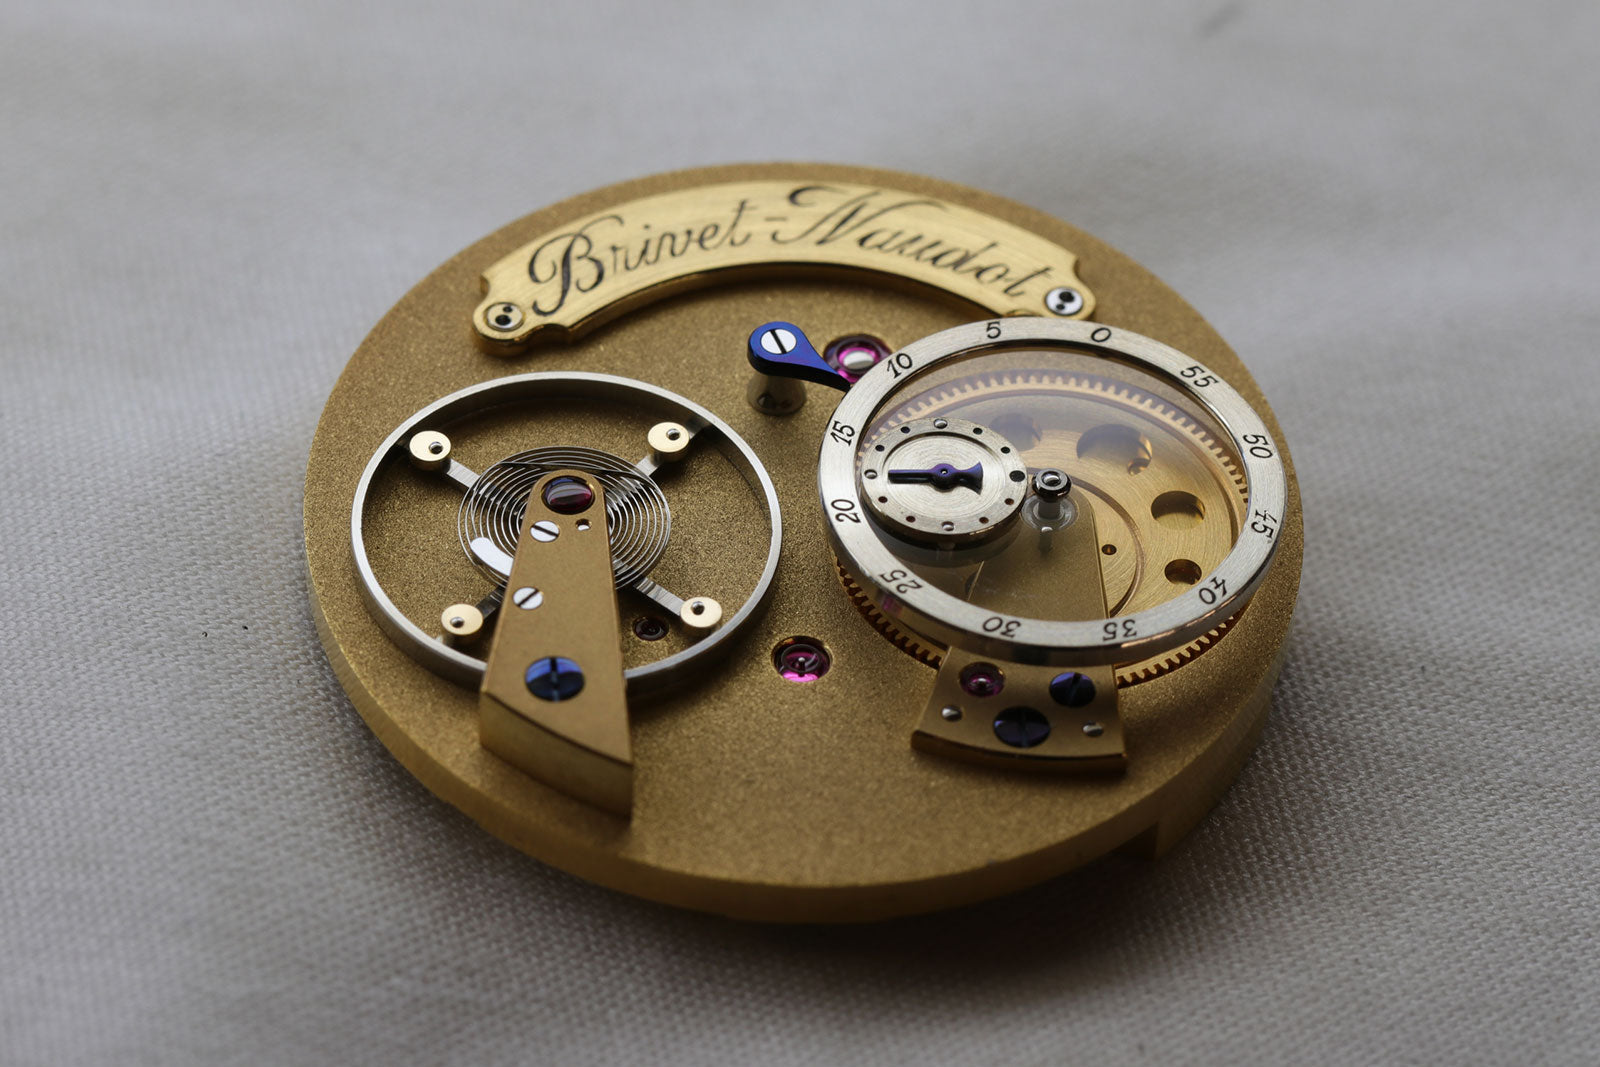 The movement of Cyril Brivet-Naudot wristwatch for A Collected Man London